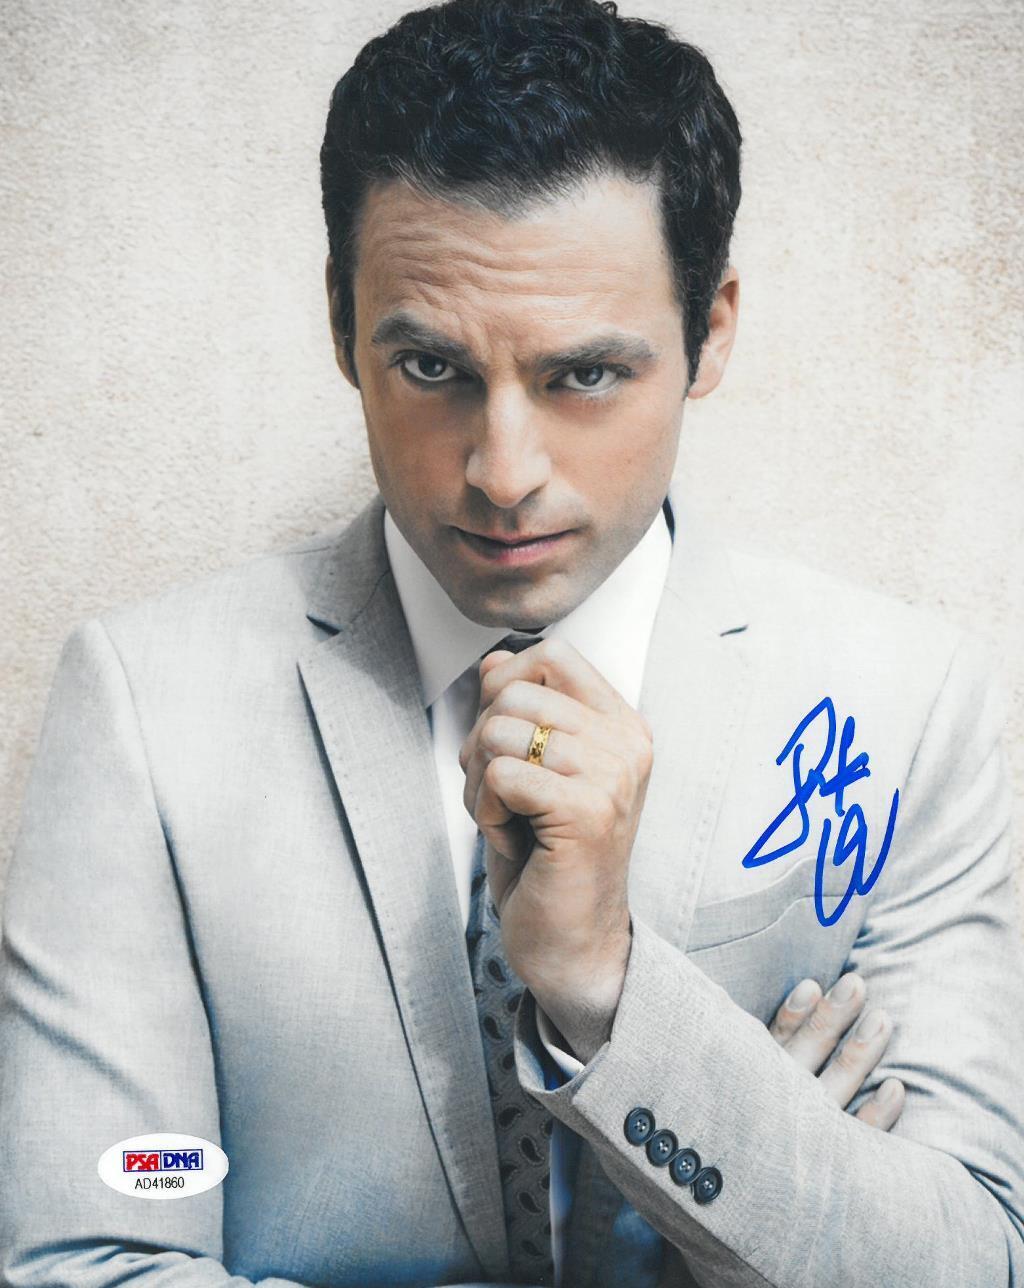 Justin Kirk Signed Authentic Autographed 8x10 Photo Poster painting PSA/DNA #AD41860